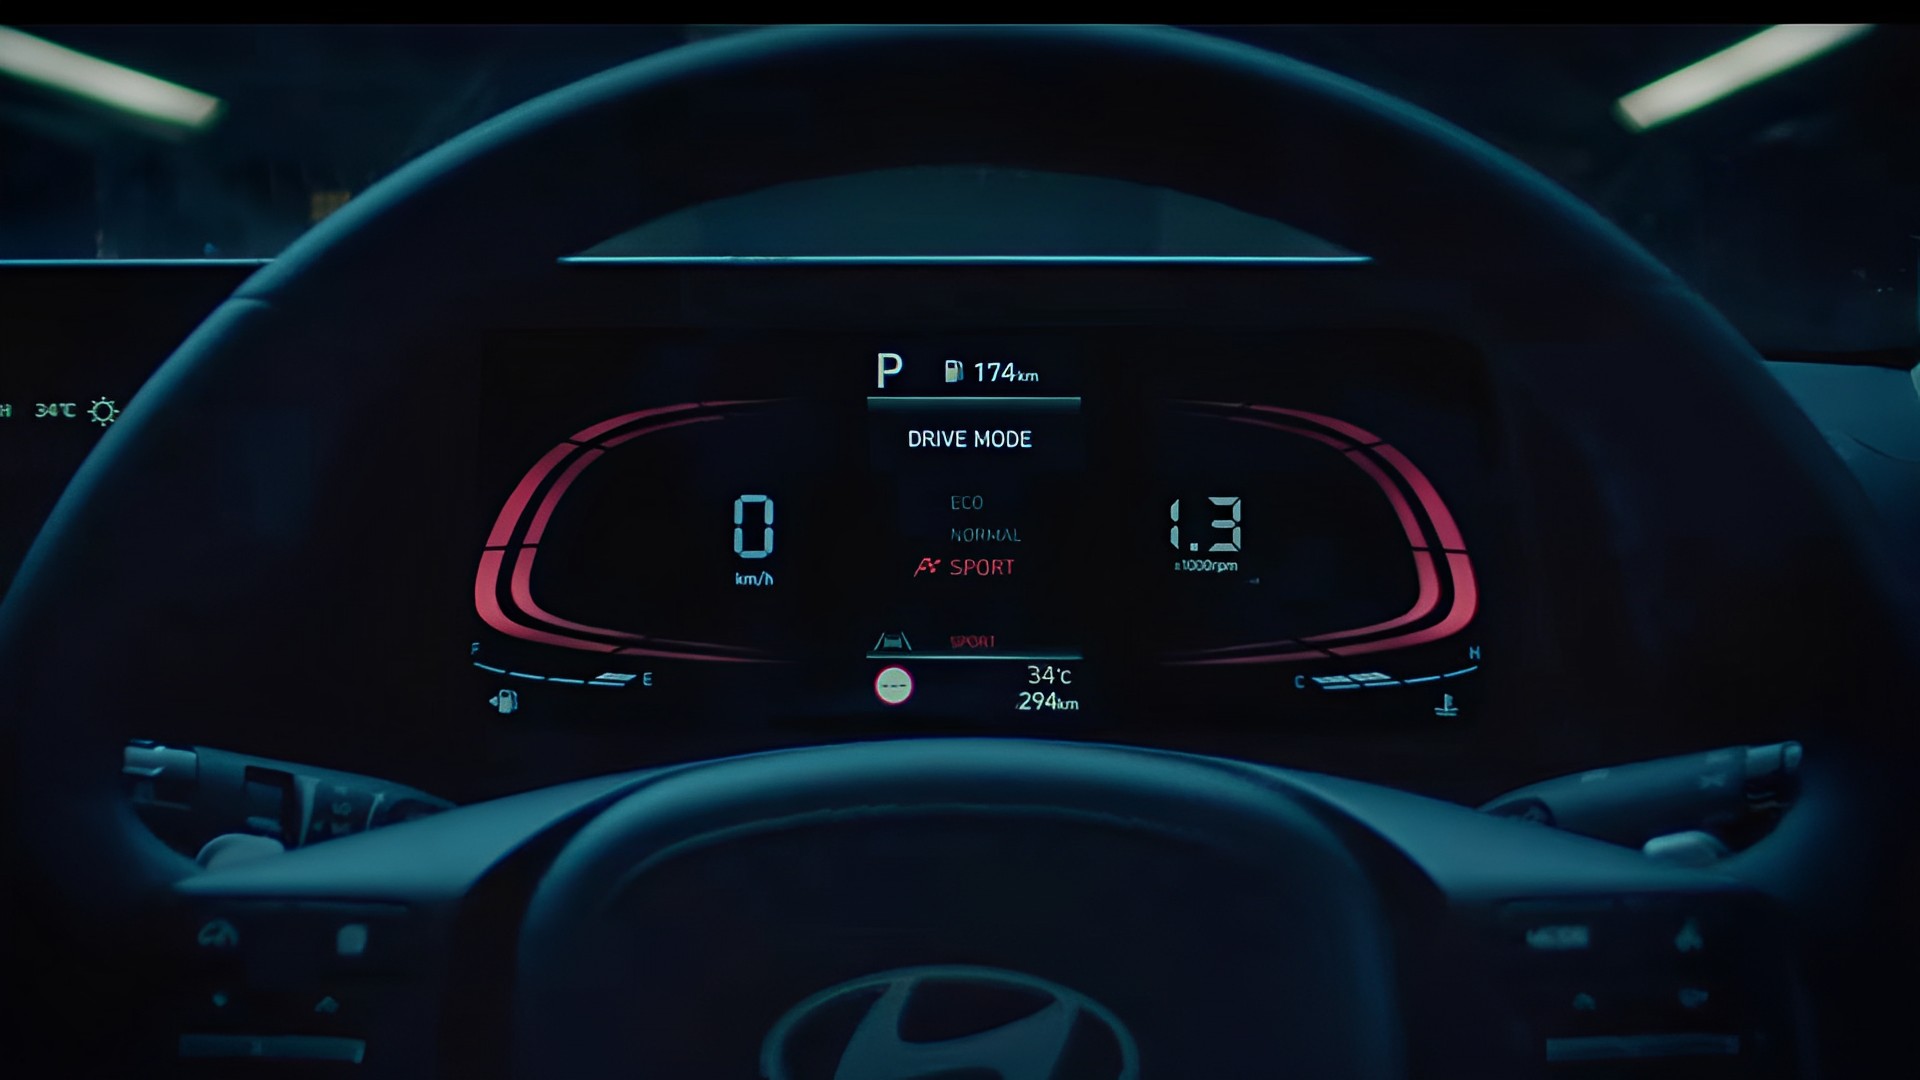 More teasers of the next-gen Hyundai Accent interior